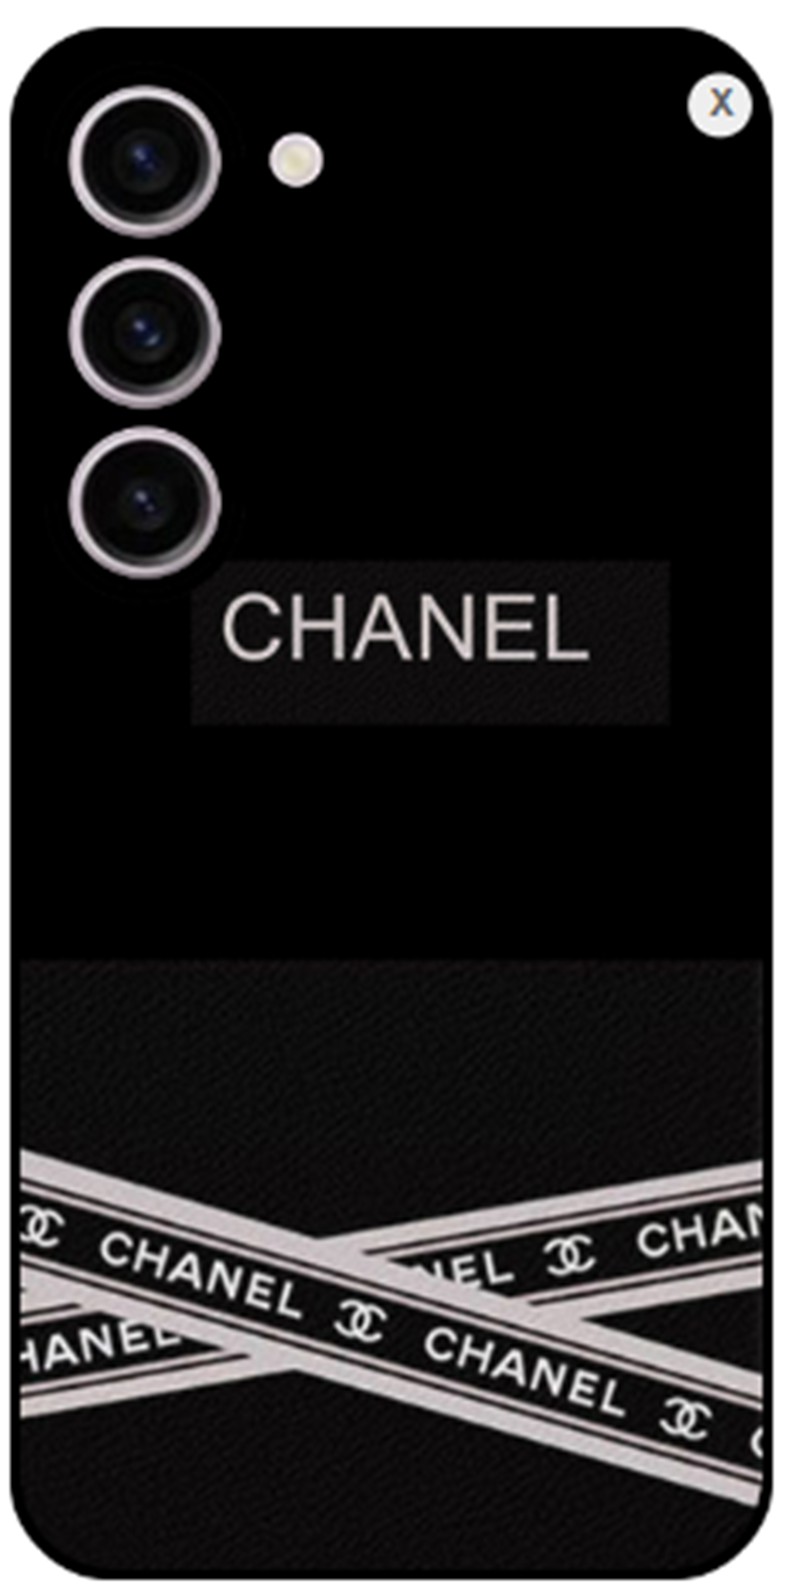 Chanel Luxury Case Back Cover  shell schutzhülleFashion Brand Full Cover housseShockproof Protective Designer iPhone Case